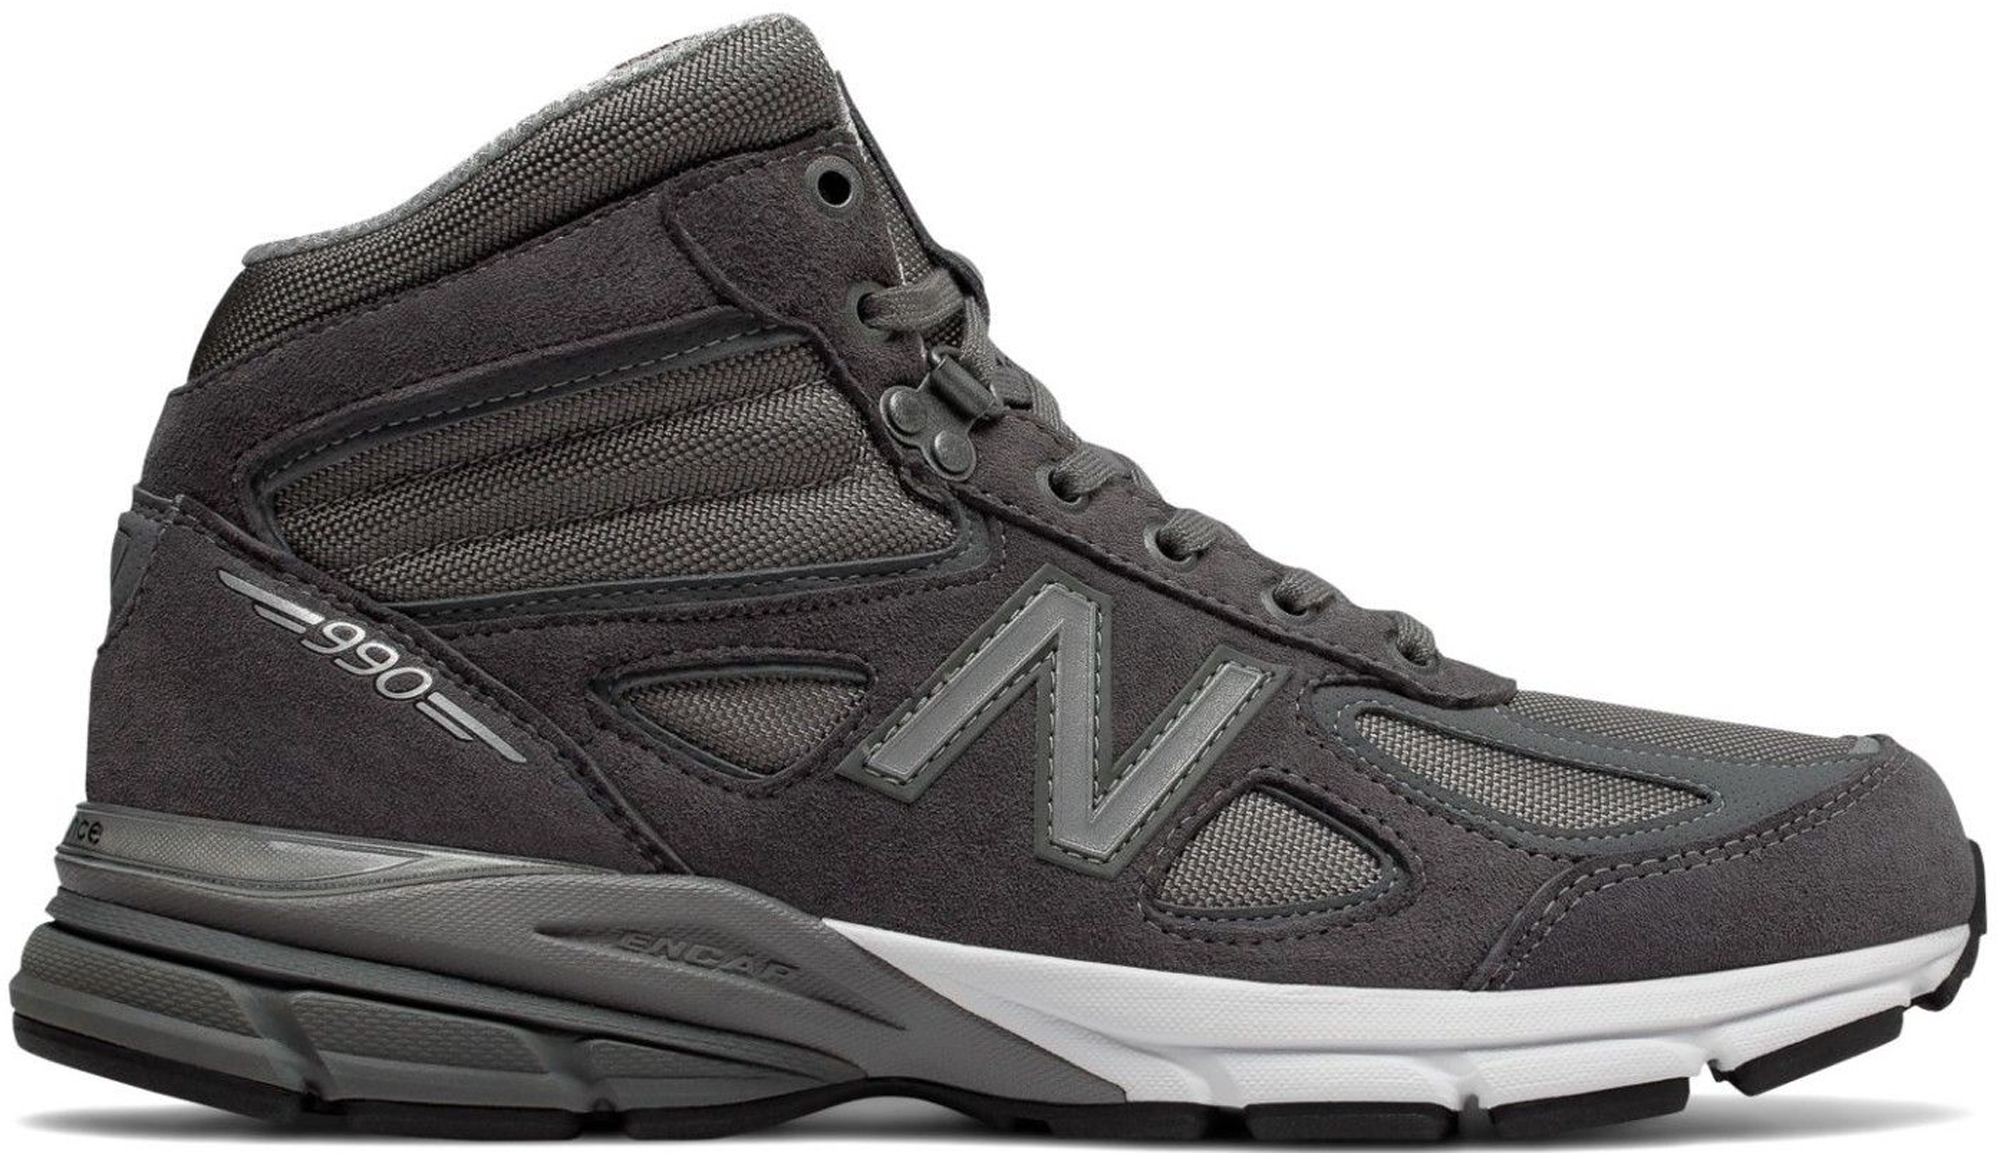 new balance black panther shoes